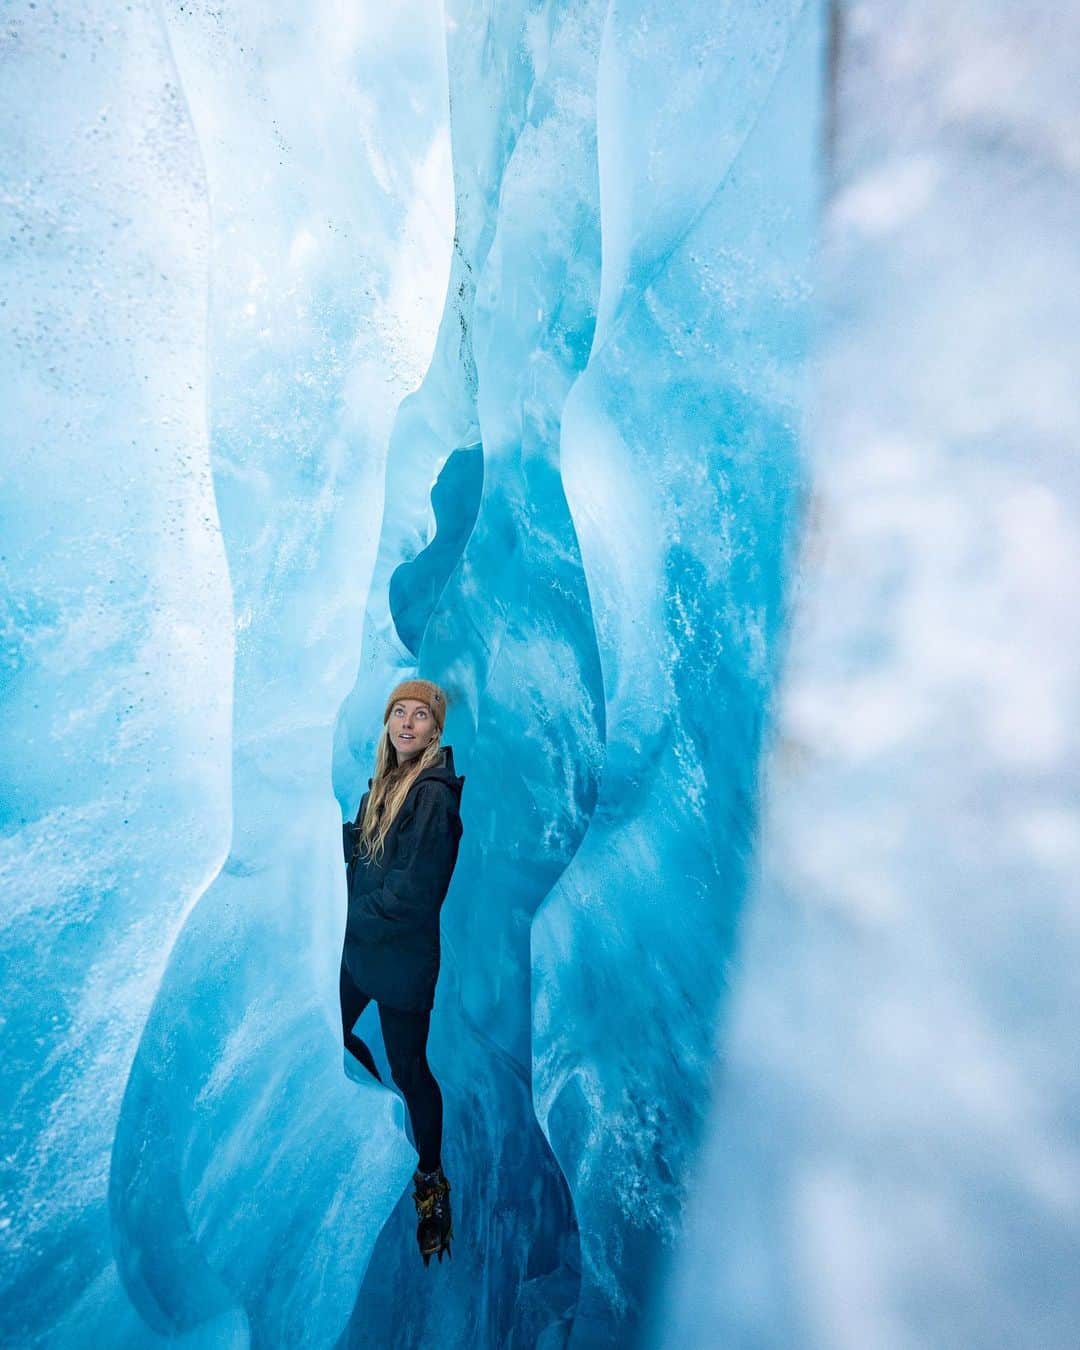 Travis Burkeのインスタグラム：「Ice cave slot canyons!! After catching a helicopter ride to Tasman glacier we rappelled down into these frozen passageways beneath several meters of ancient ice. My trip in New Zealand with @gypsealaysea has been absolutely incredible so far, and we’re excited to be able to continue creating & sharing these special moments with you all. #newzealand #icecaves #nzmustdo #tasmanglacier」